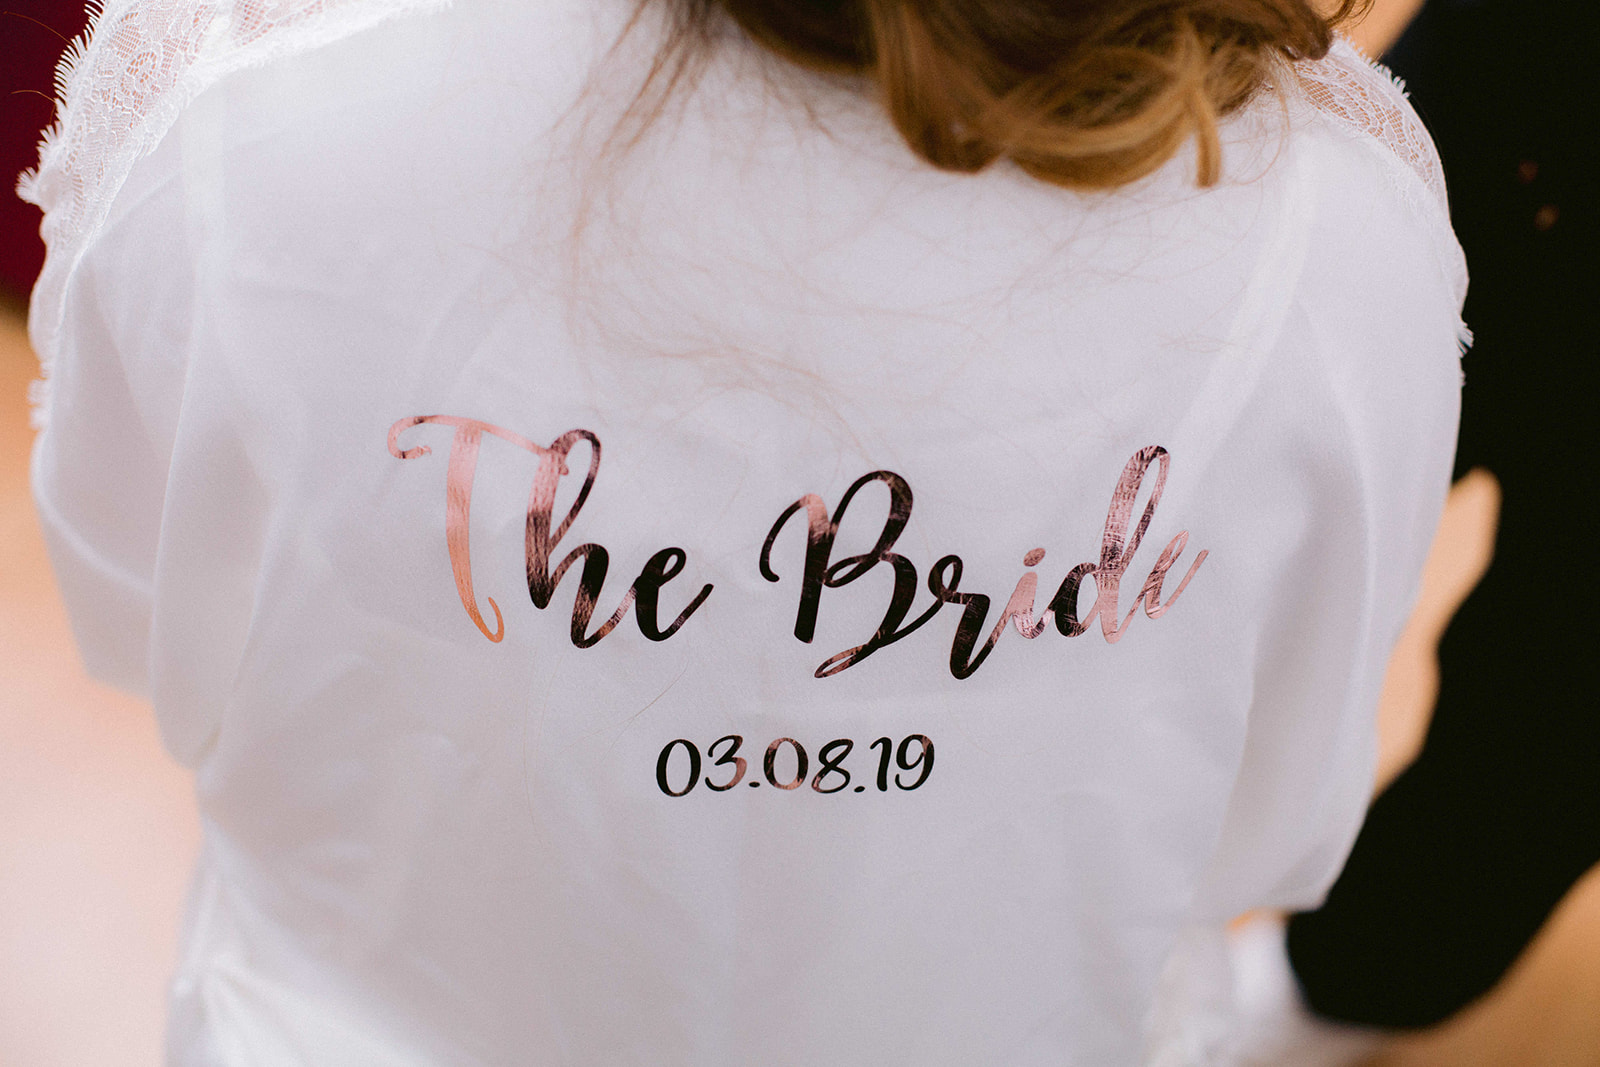 bride to be